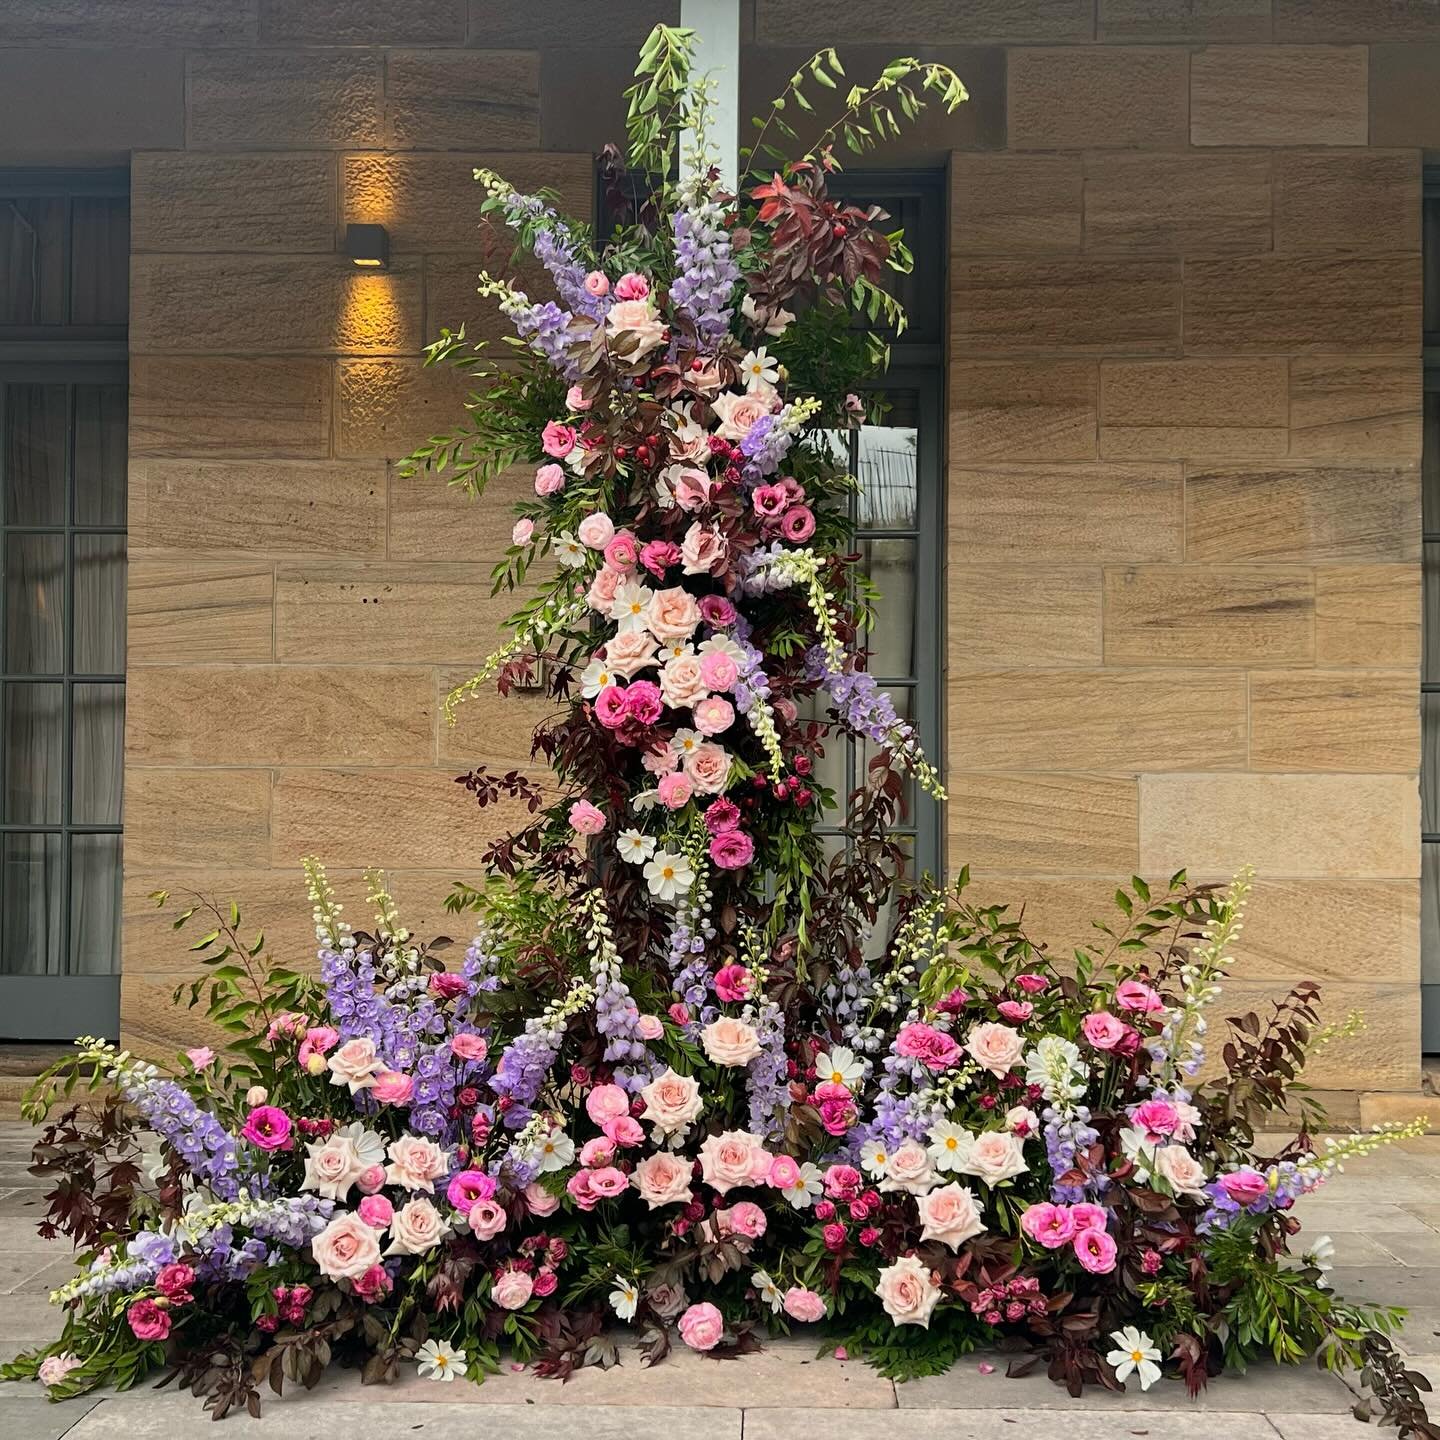 Experience a Gunners Barracks spring wedding 🌸Planning your ceremony here?

Some insights from a seasoned florist: consider that we are sharing the space with a bustling restaurant. When budgeting and choosing your ceremony design remember that acce